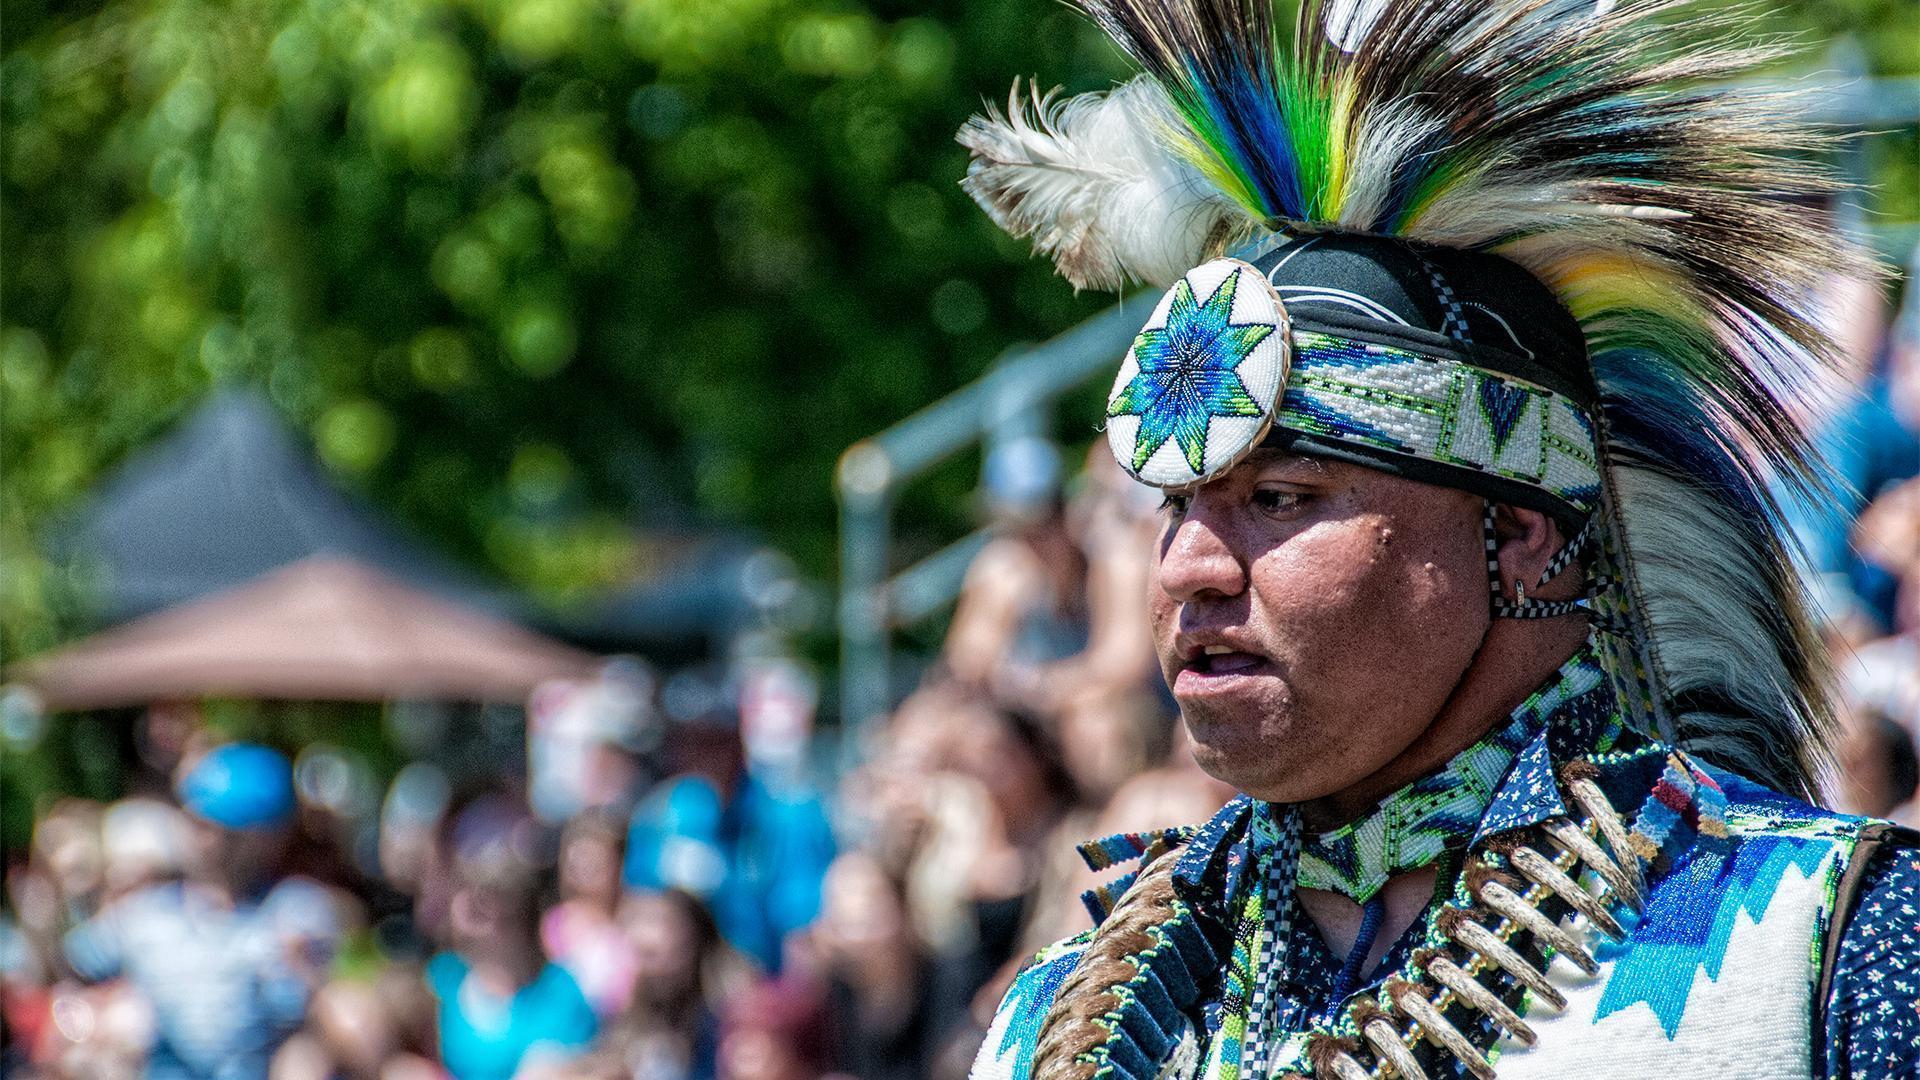 New Brunswick's First Nations are well represented at the St. Mary's Powwow in Fredericton.